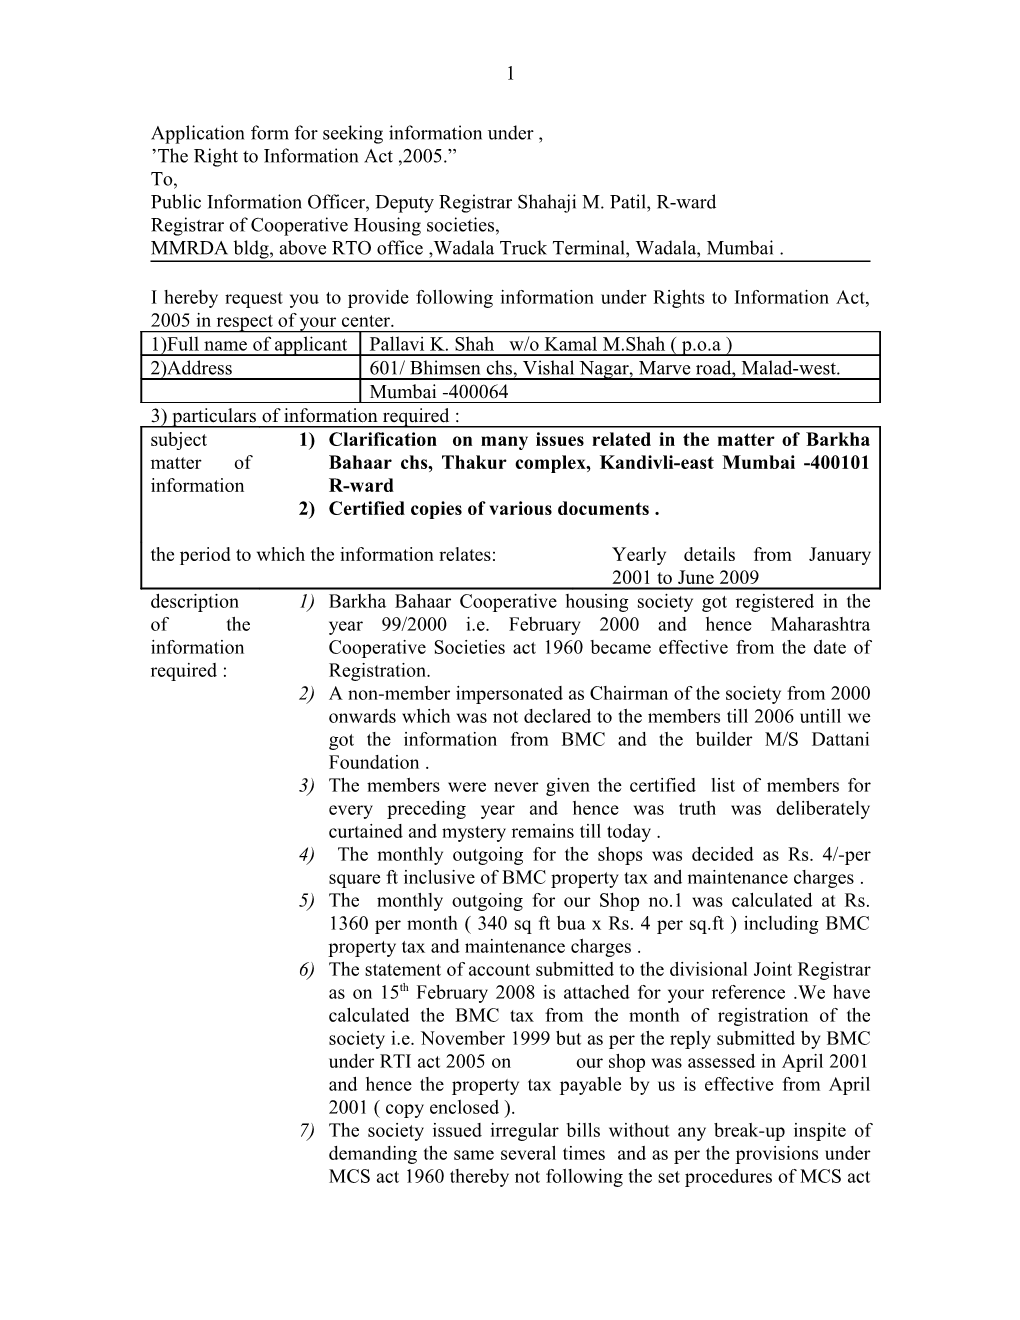 Application Form for Seeking Information Under the Right to Information Act ,2005